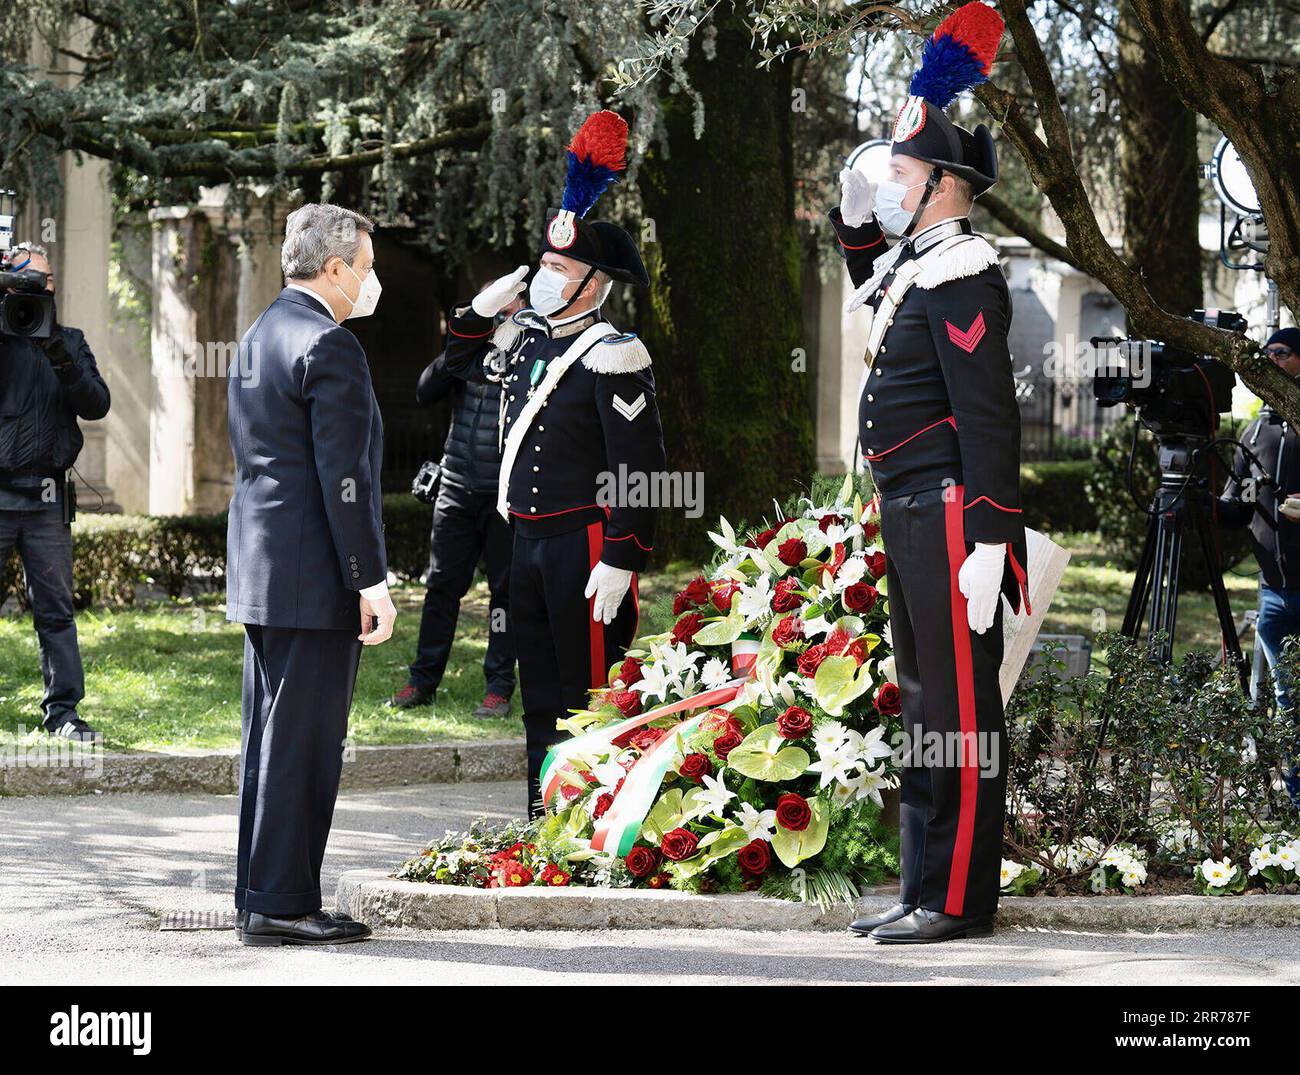 210319 -- BERGAMO, March 19, 2021 -- Italian Prime Minister Mario Draghi lays a flower wreath during an activity to mark the first National Day of Remembrance for COVID-19 victims in Bergamo, Italy, March 18, 2021. Italy on Thursday marked the first National Day of Remembrance for COVID-19 victims. According to the Health Ministry s data updated to Wednesday, Italy s death toll reached 103,432. Overall, it counts more than 3.2 million coronavirus cases, which included the deaths, plus over 2.6 million recoveries, and over 539,000 active infections. TO GO WITH Feature: Italy marks 1st National Stock Photo